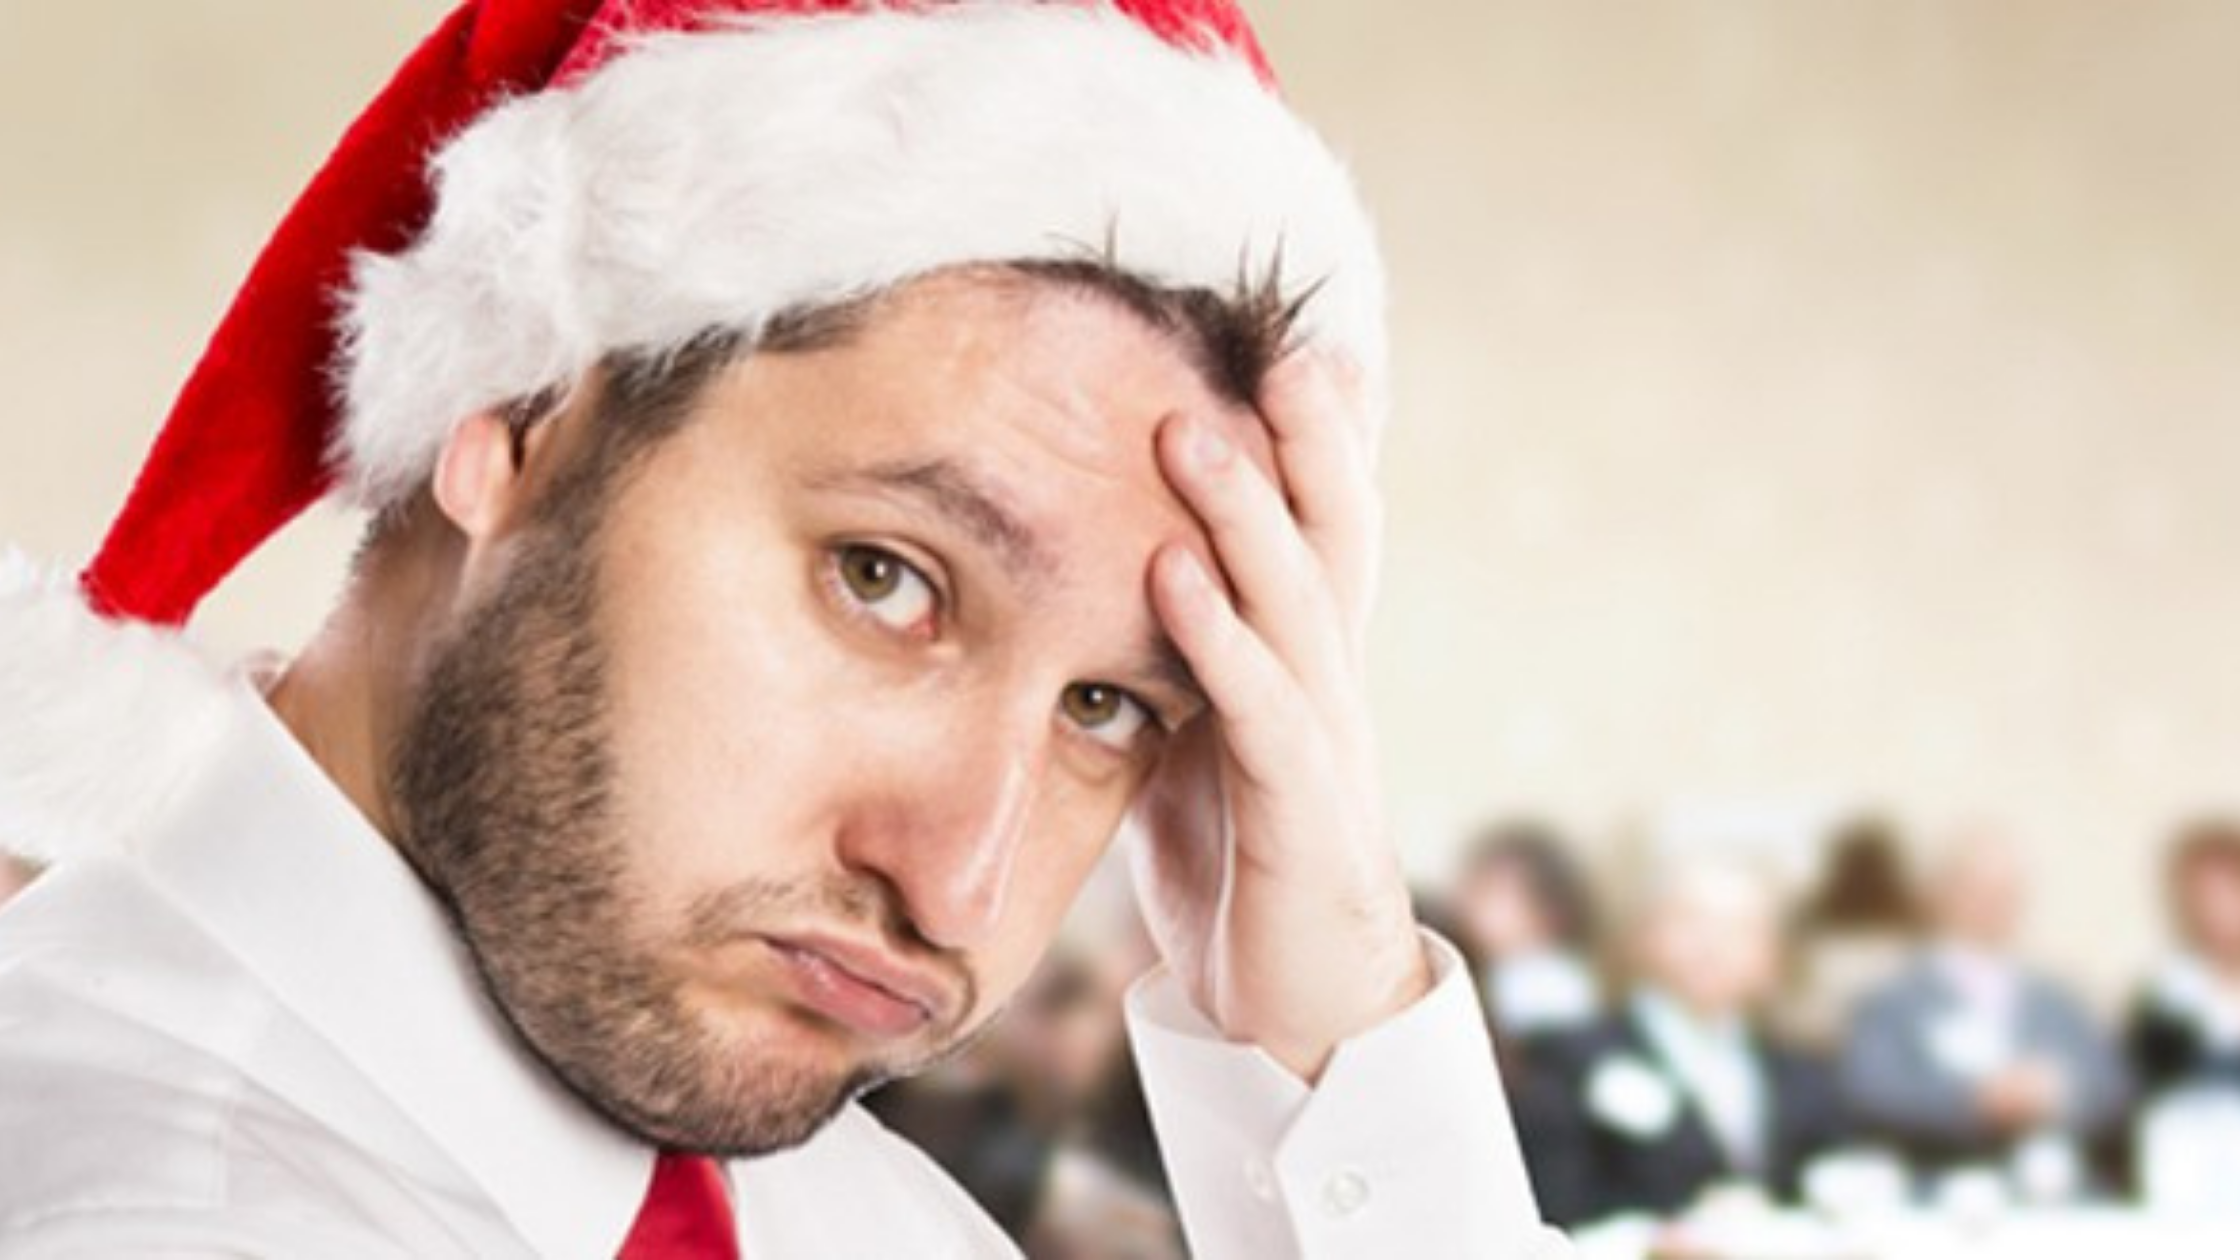 4 Common Causes of Christmas Cash Flow Problems